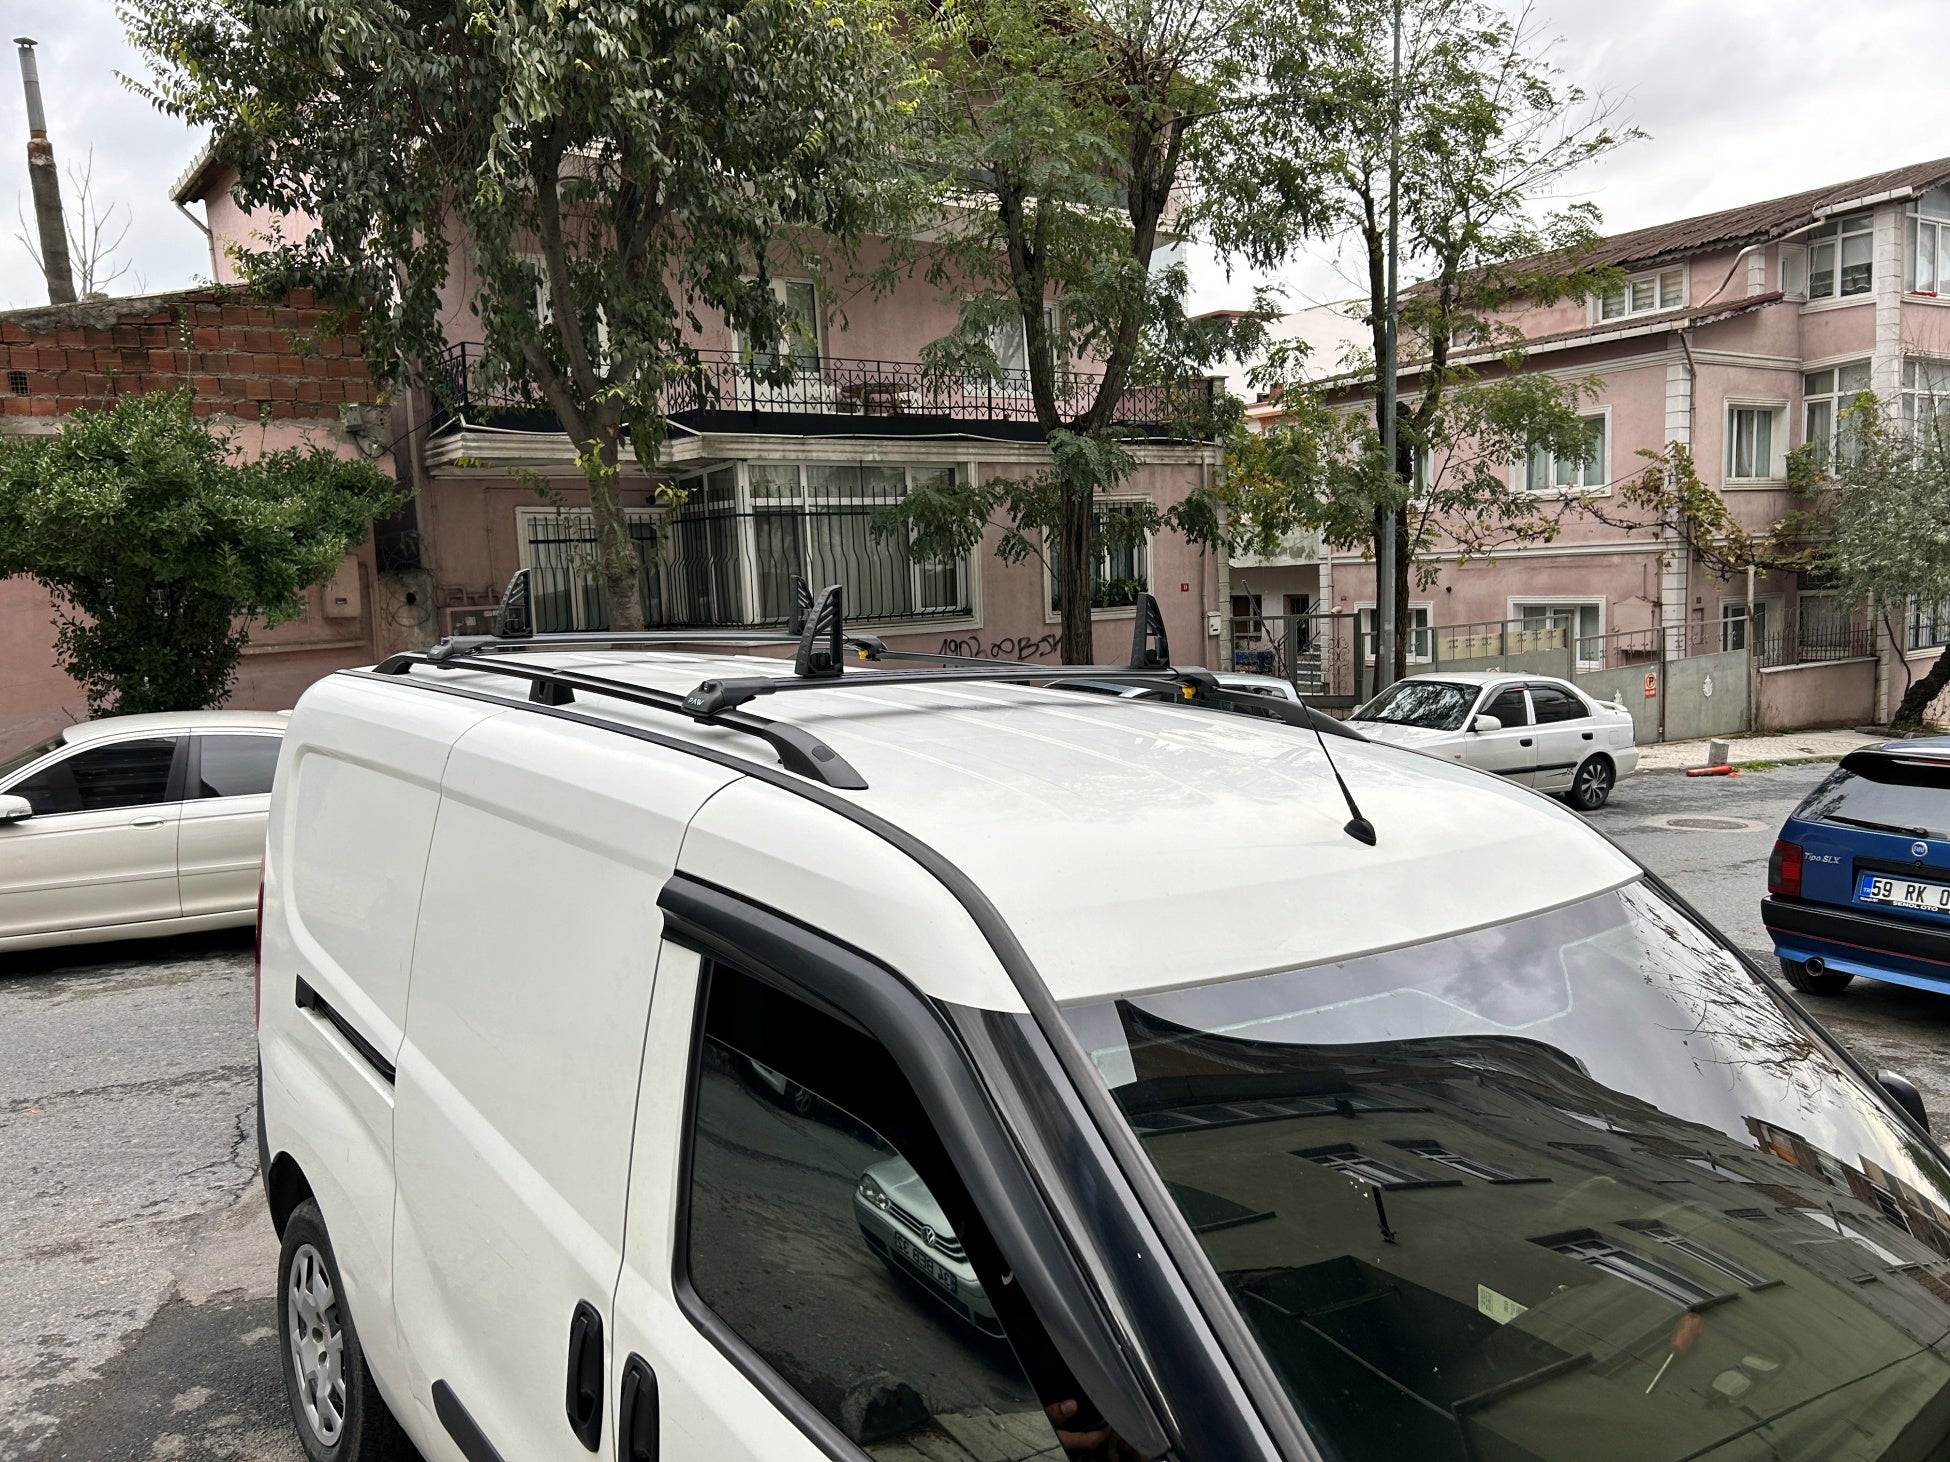 For RAM ProMaster City 2015-Up Roof Side Rails and Roof Rack Cross Bars Alu Silver